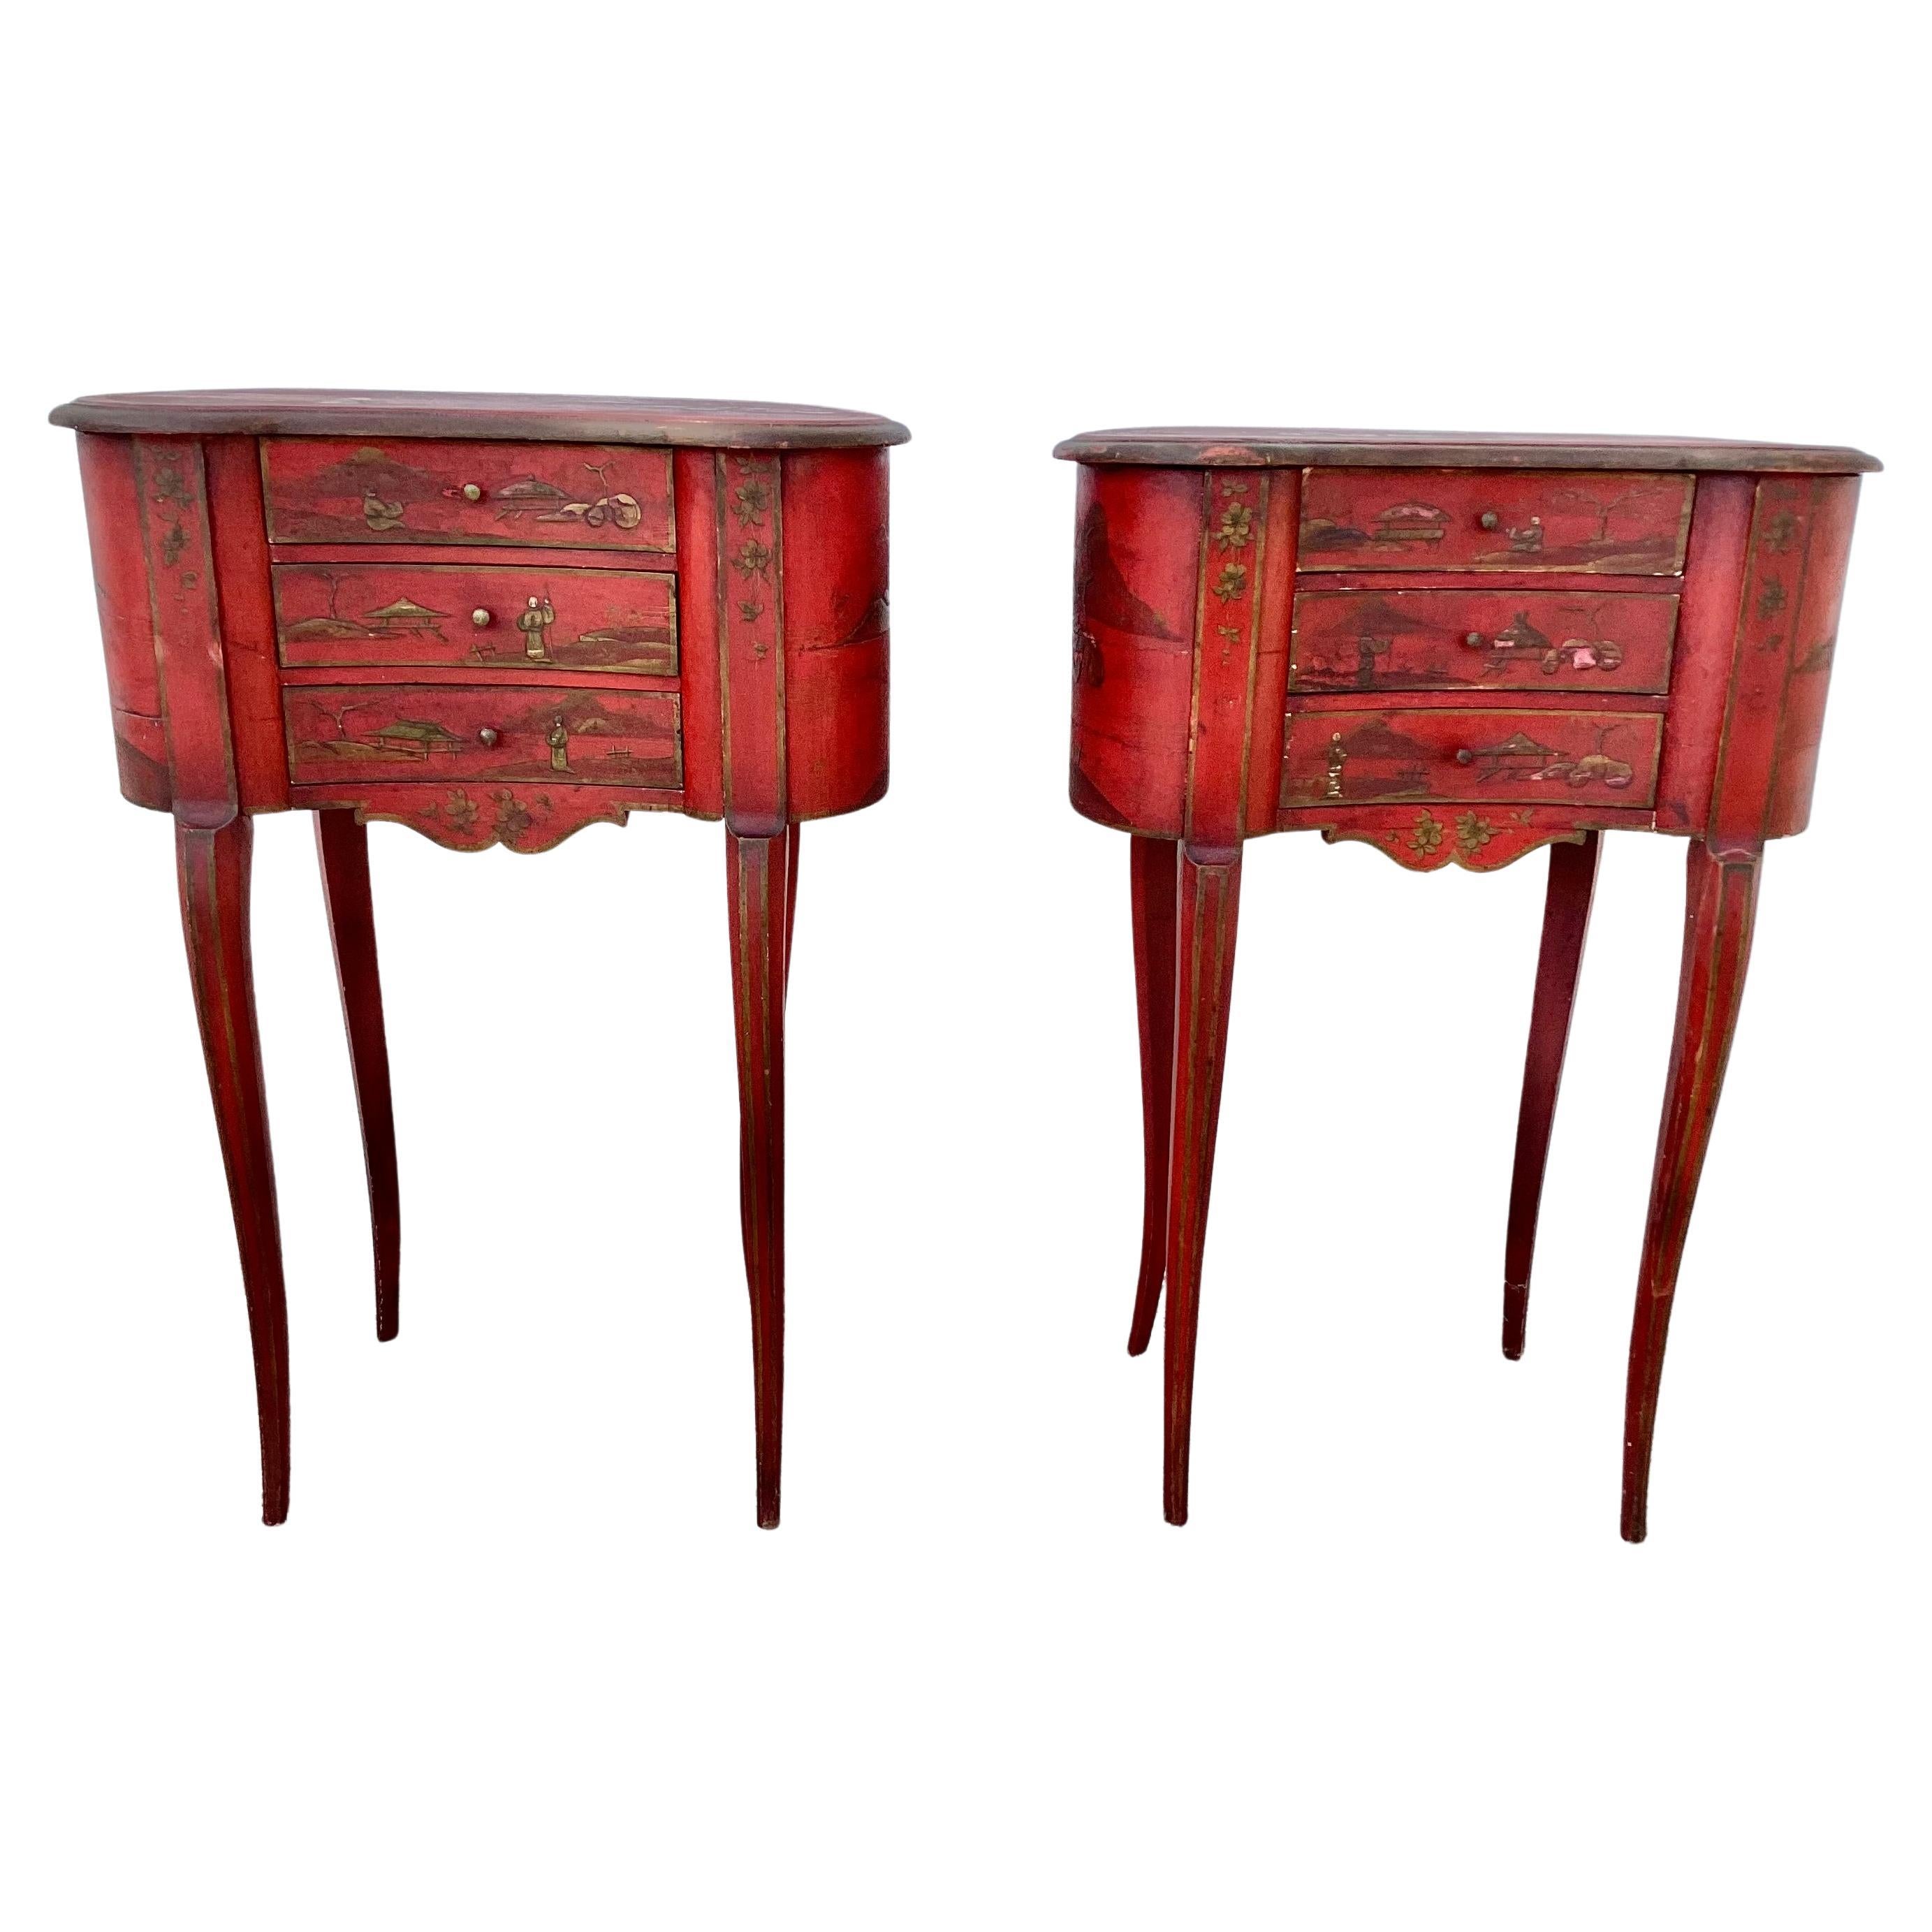 Pair of 19th Century French Red Japanned Side Tables